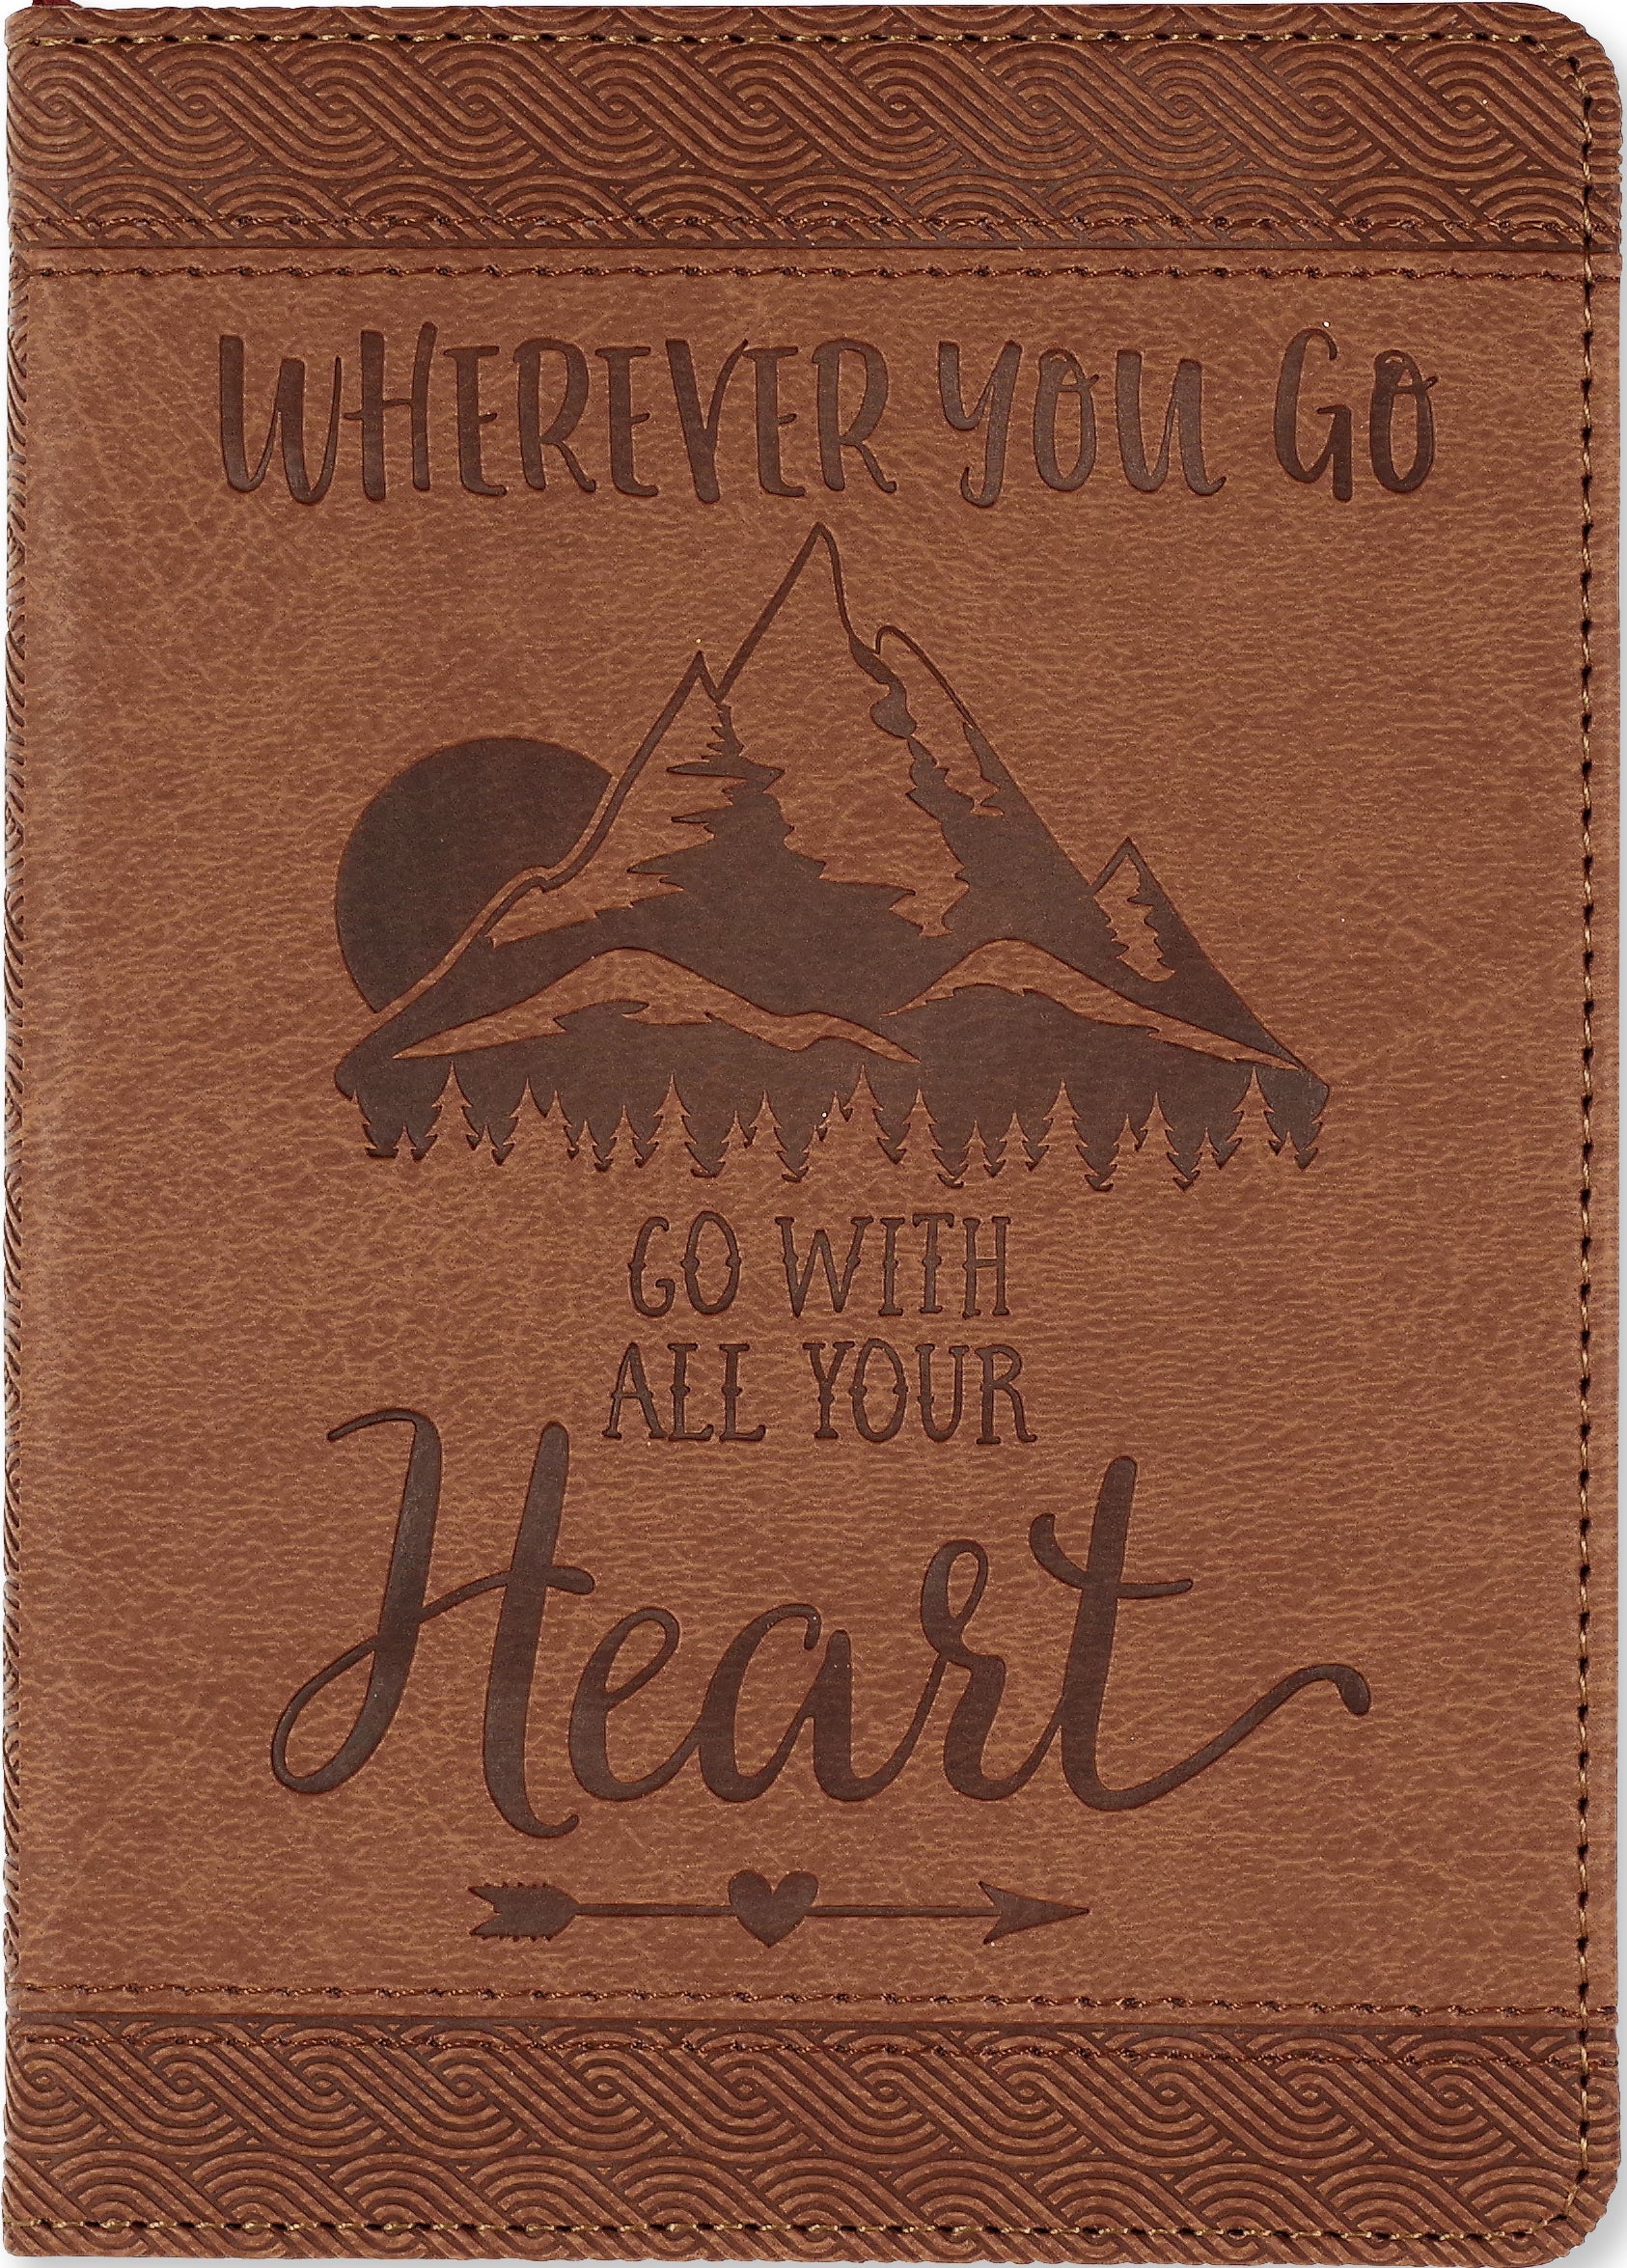 Wherever You Go, Go With All Your Heart - Artisan Journal    